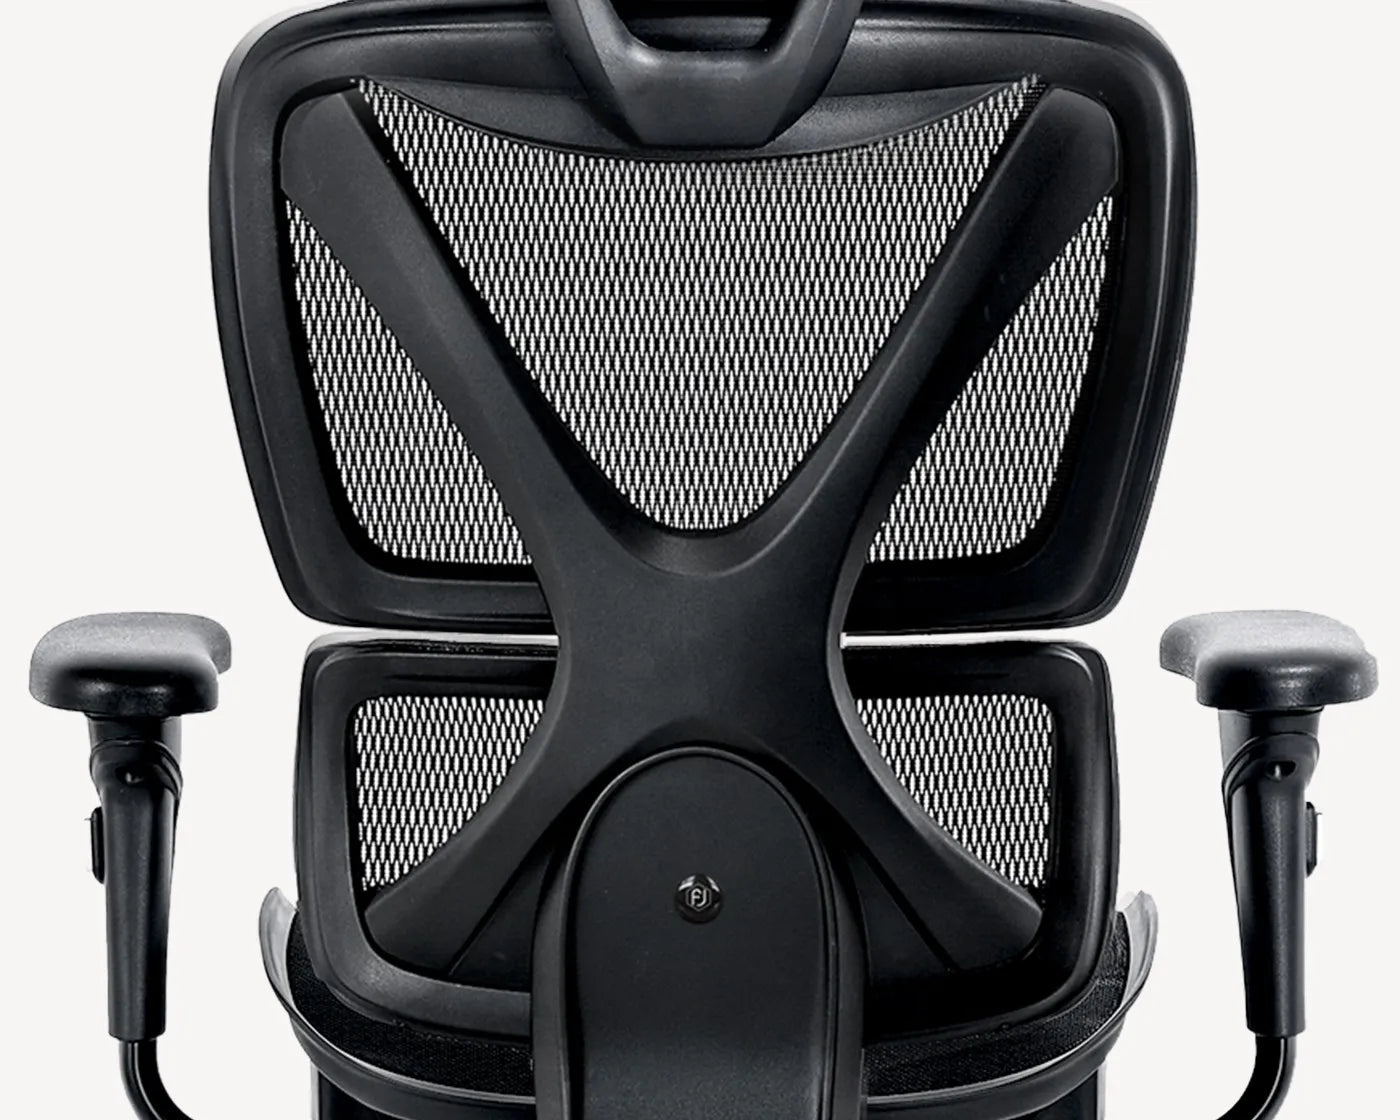 Ergonomic office chair with X-shaped backrest design, promoting 'X Marks the Comfort Spot' by BEA.